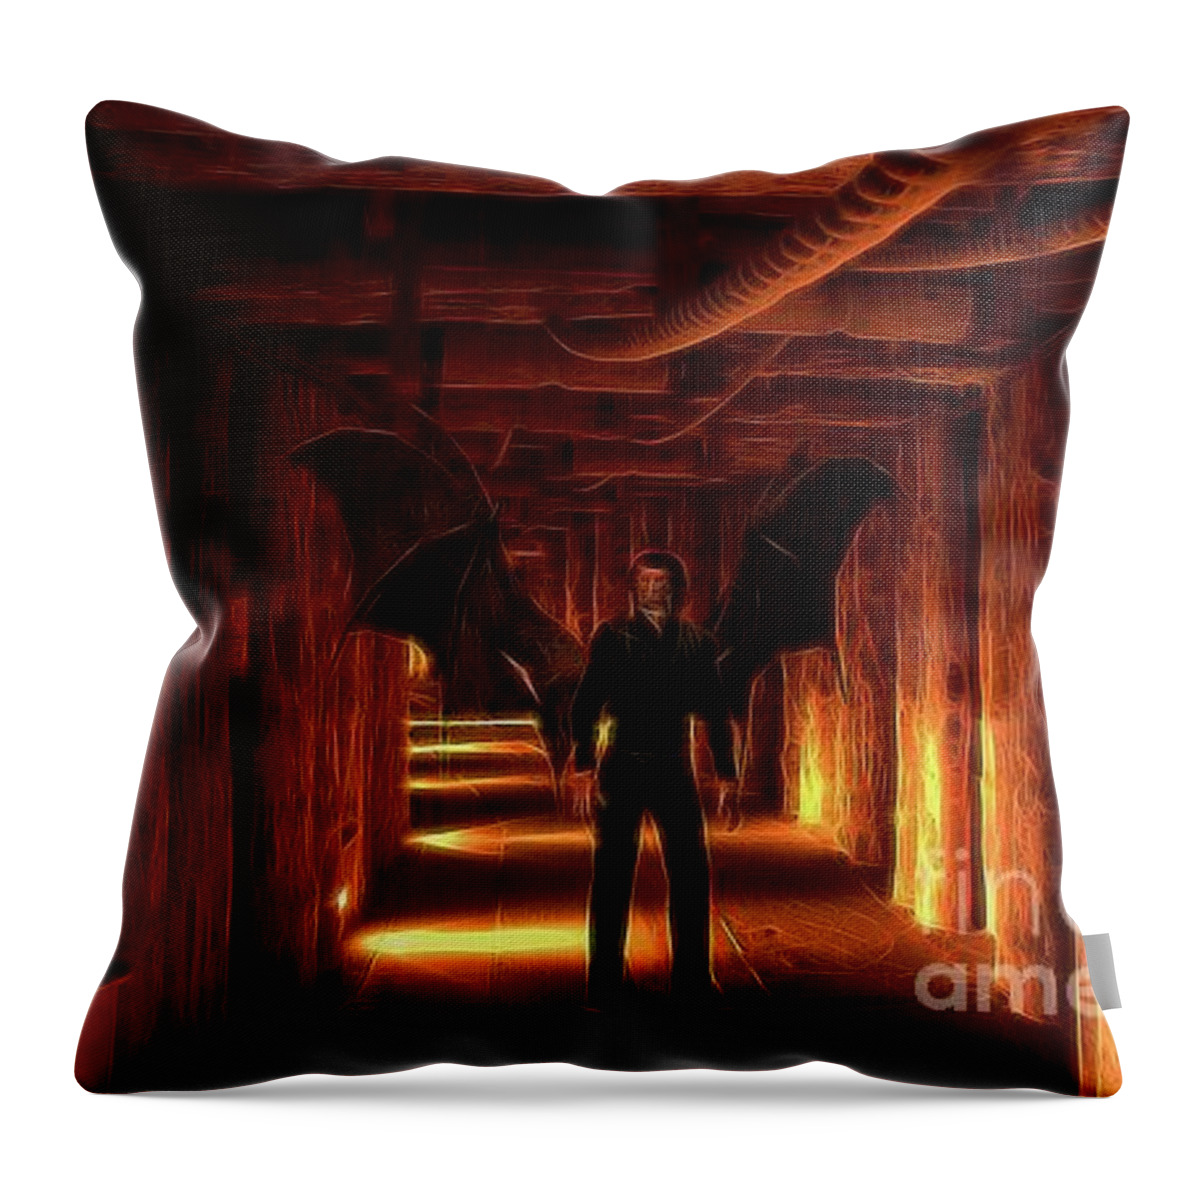 Demon Throw Pillow featuring the digital art The Vampire Tunnel by Esoterica Art Agency